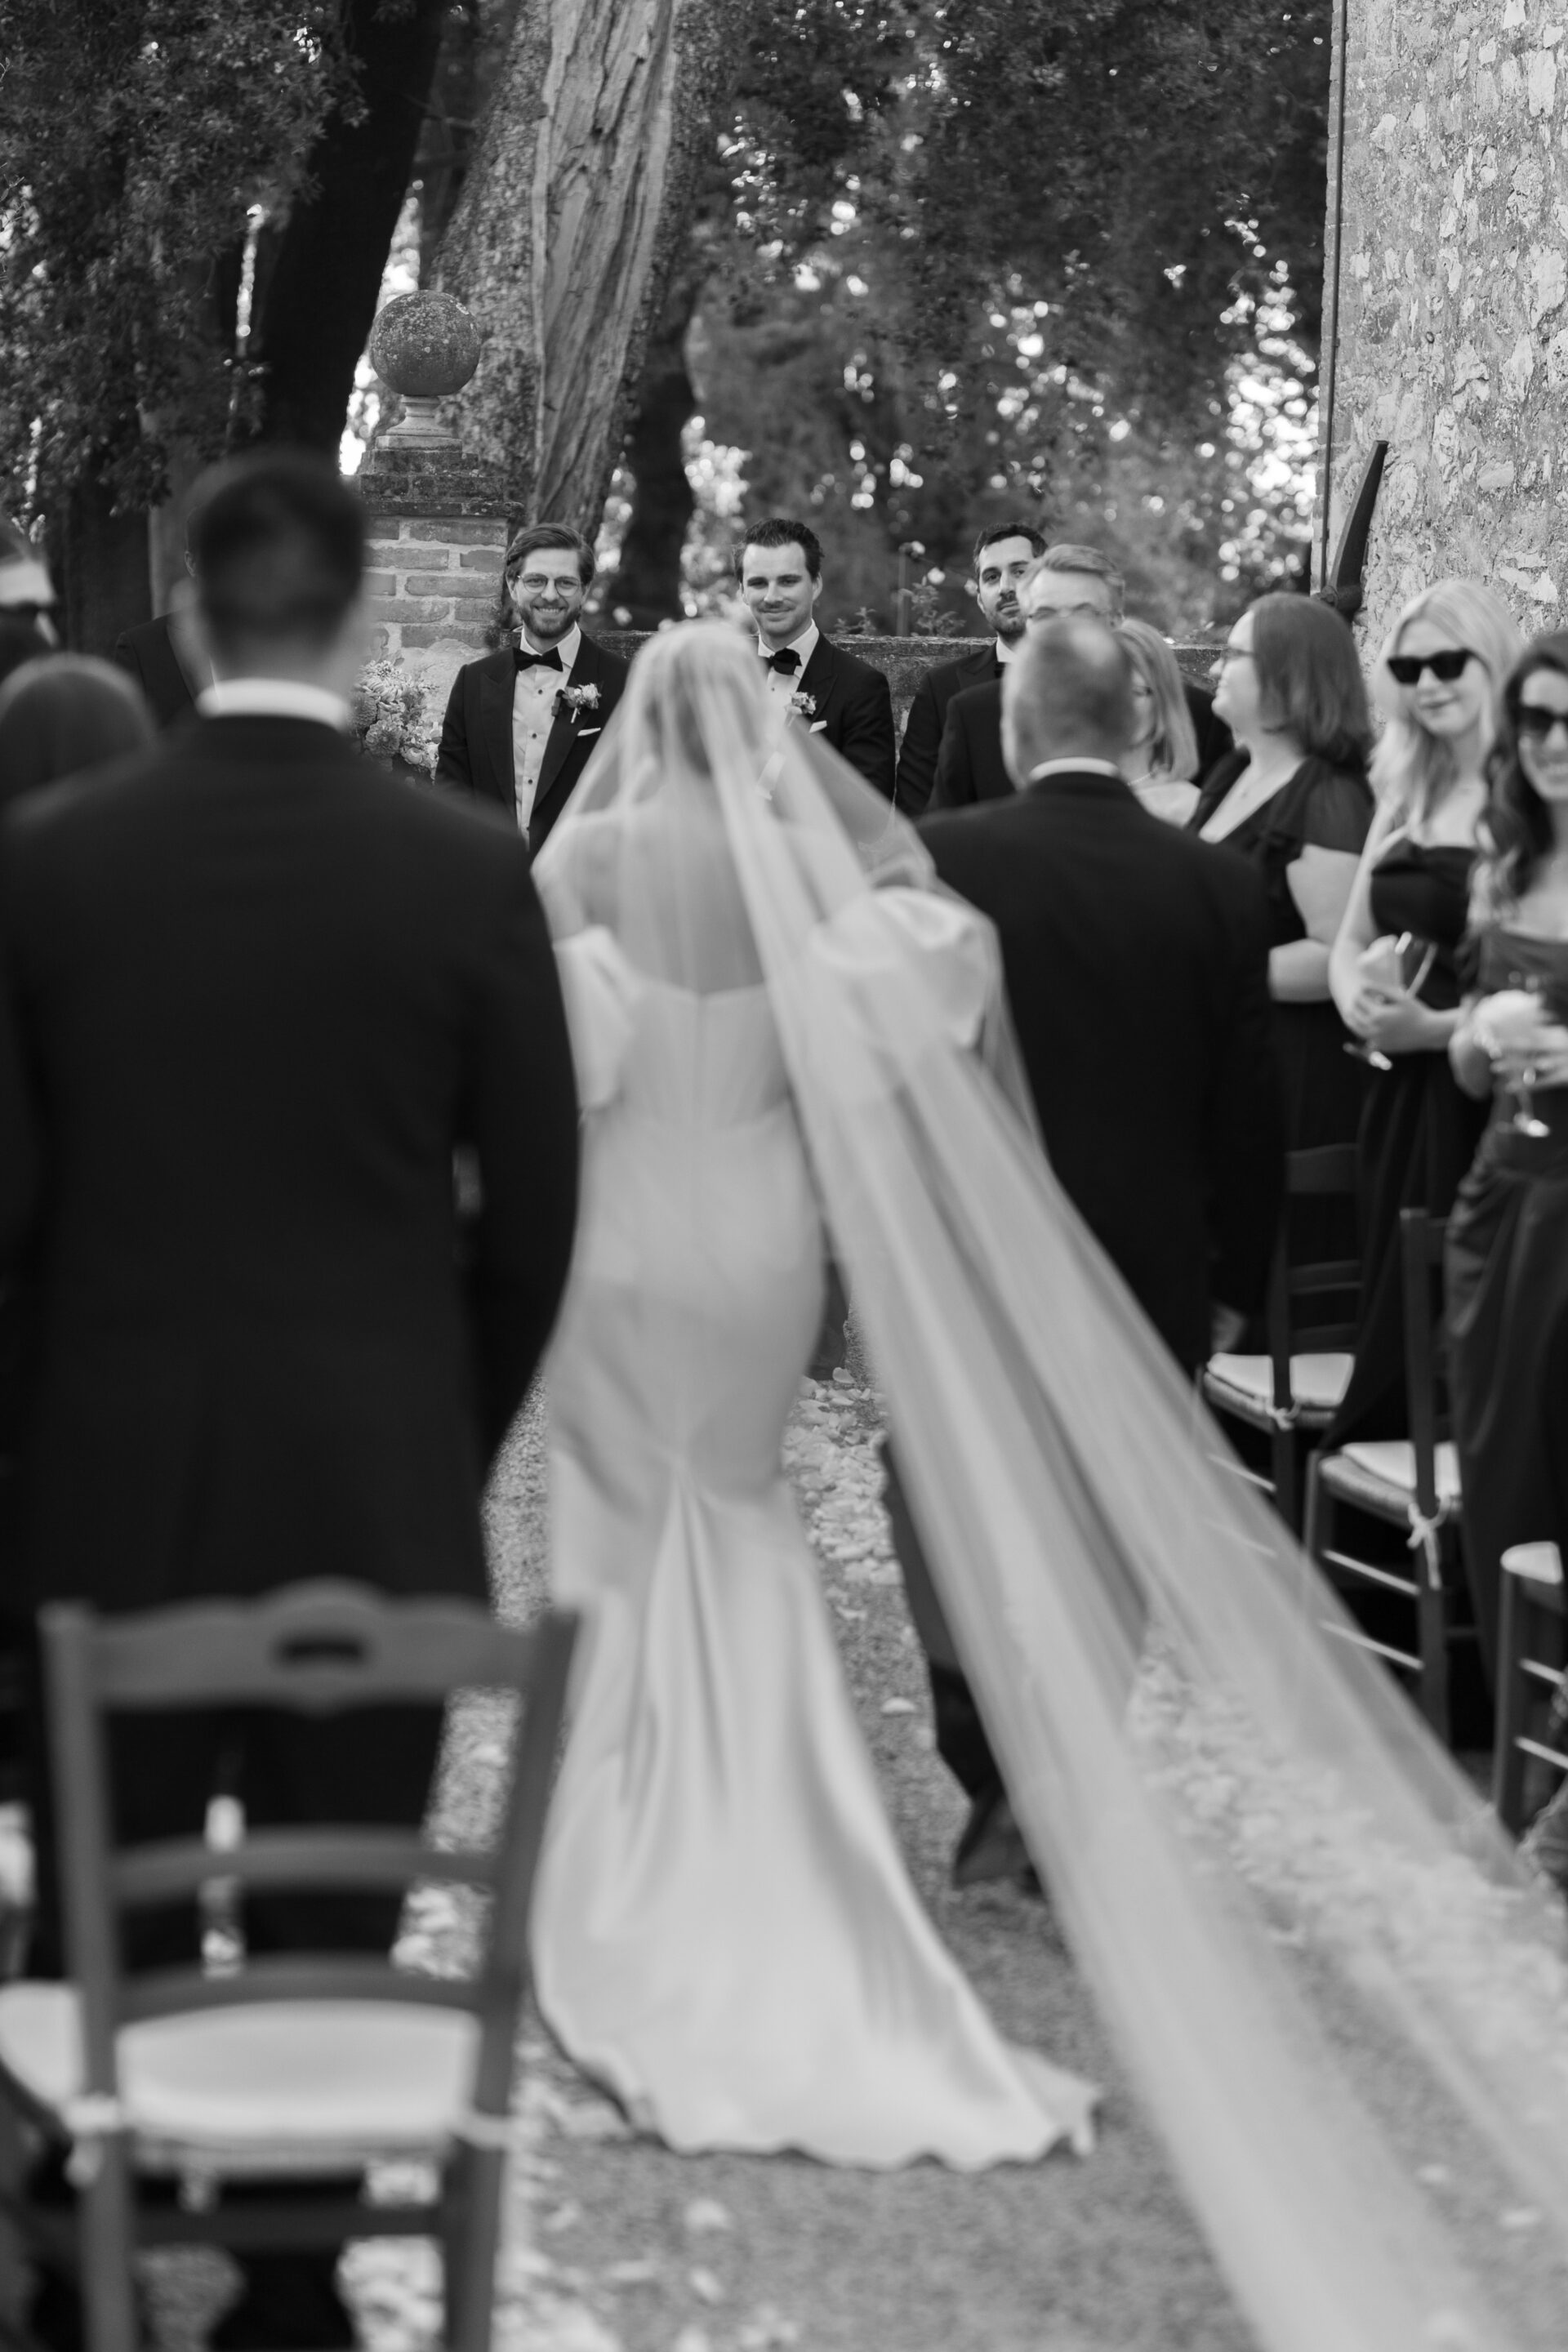 The bride walks down the aisle at her luxury Italian wedding ceremony